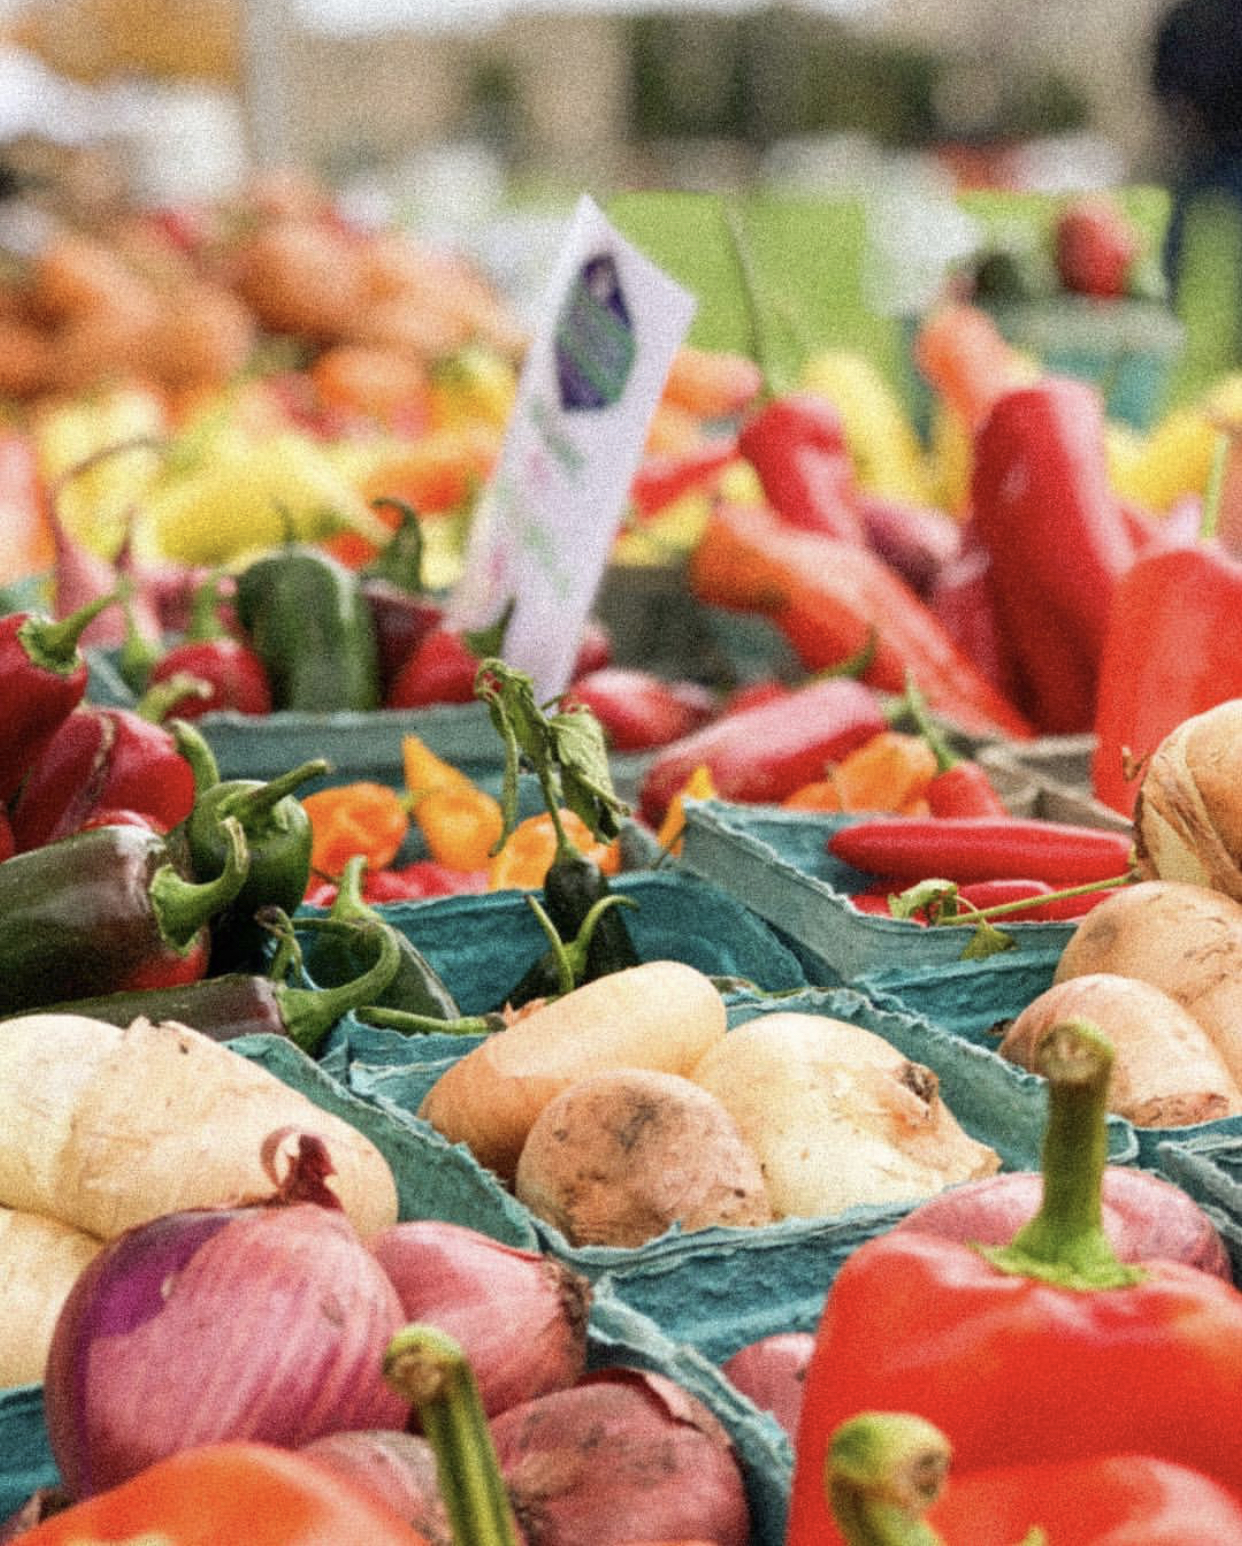 A colorful array of onions, red and green peppers in small, bluish, square containers.